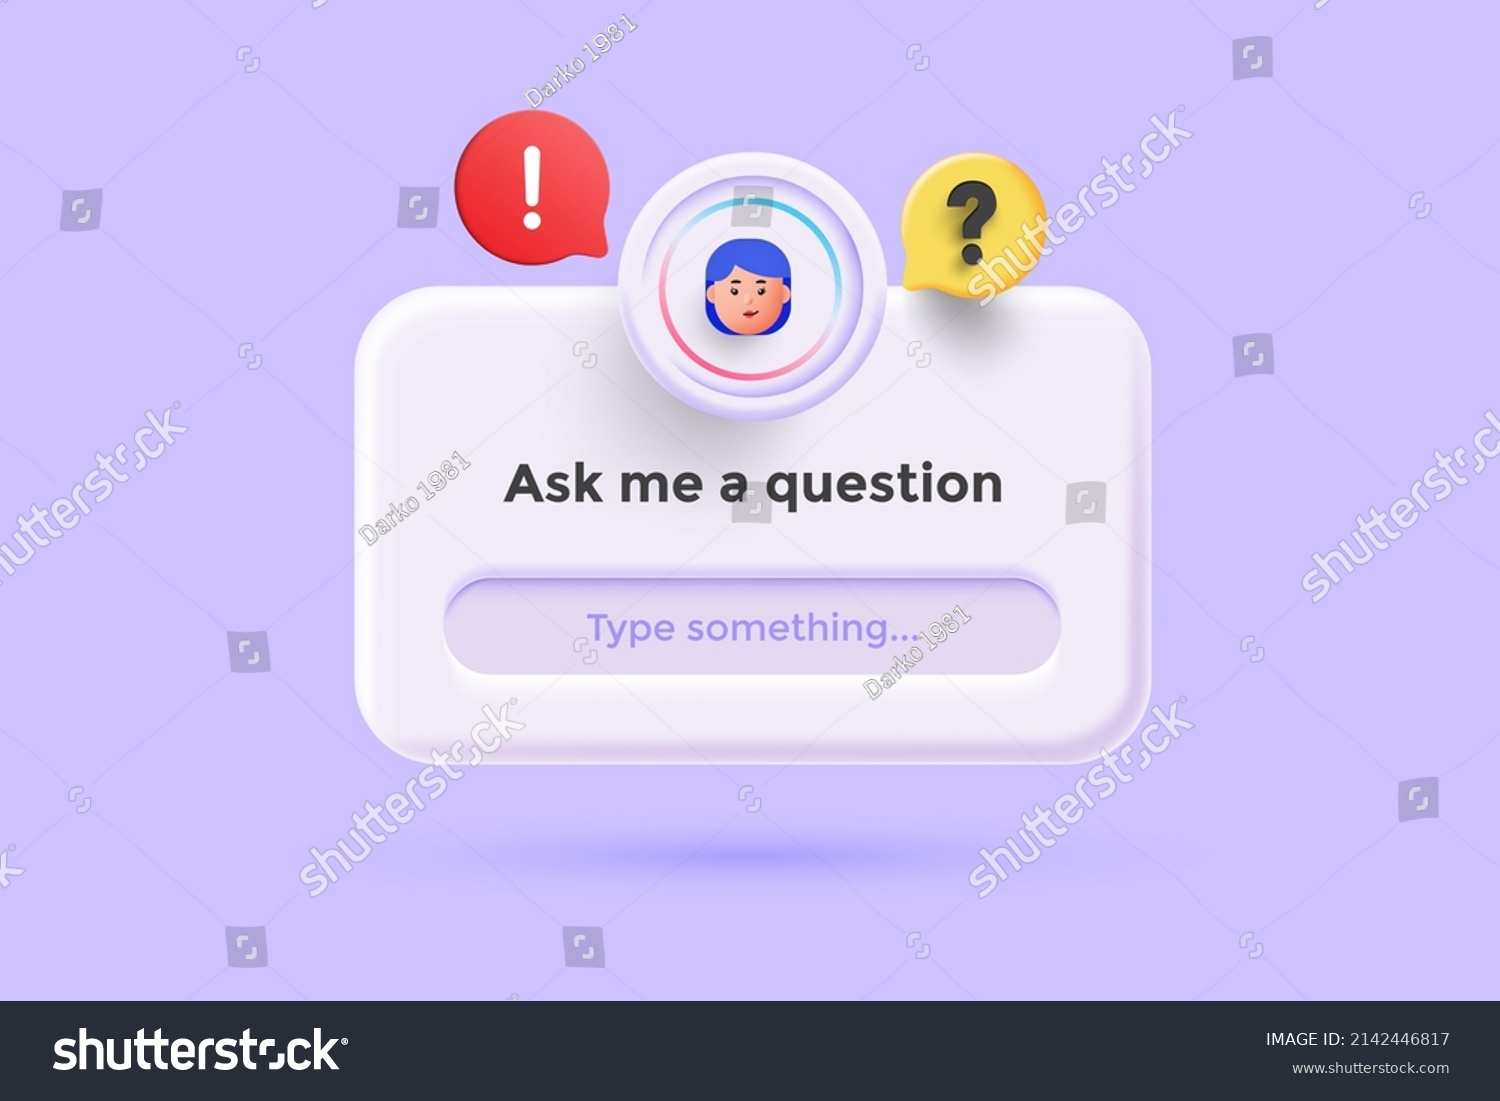 Typeform Frequently Asked Question Concept Online Stock Vector (Royalty ...